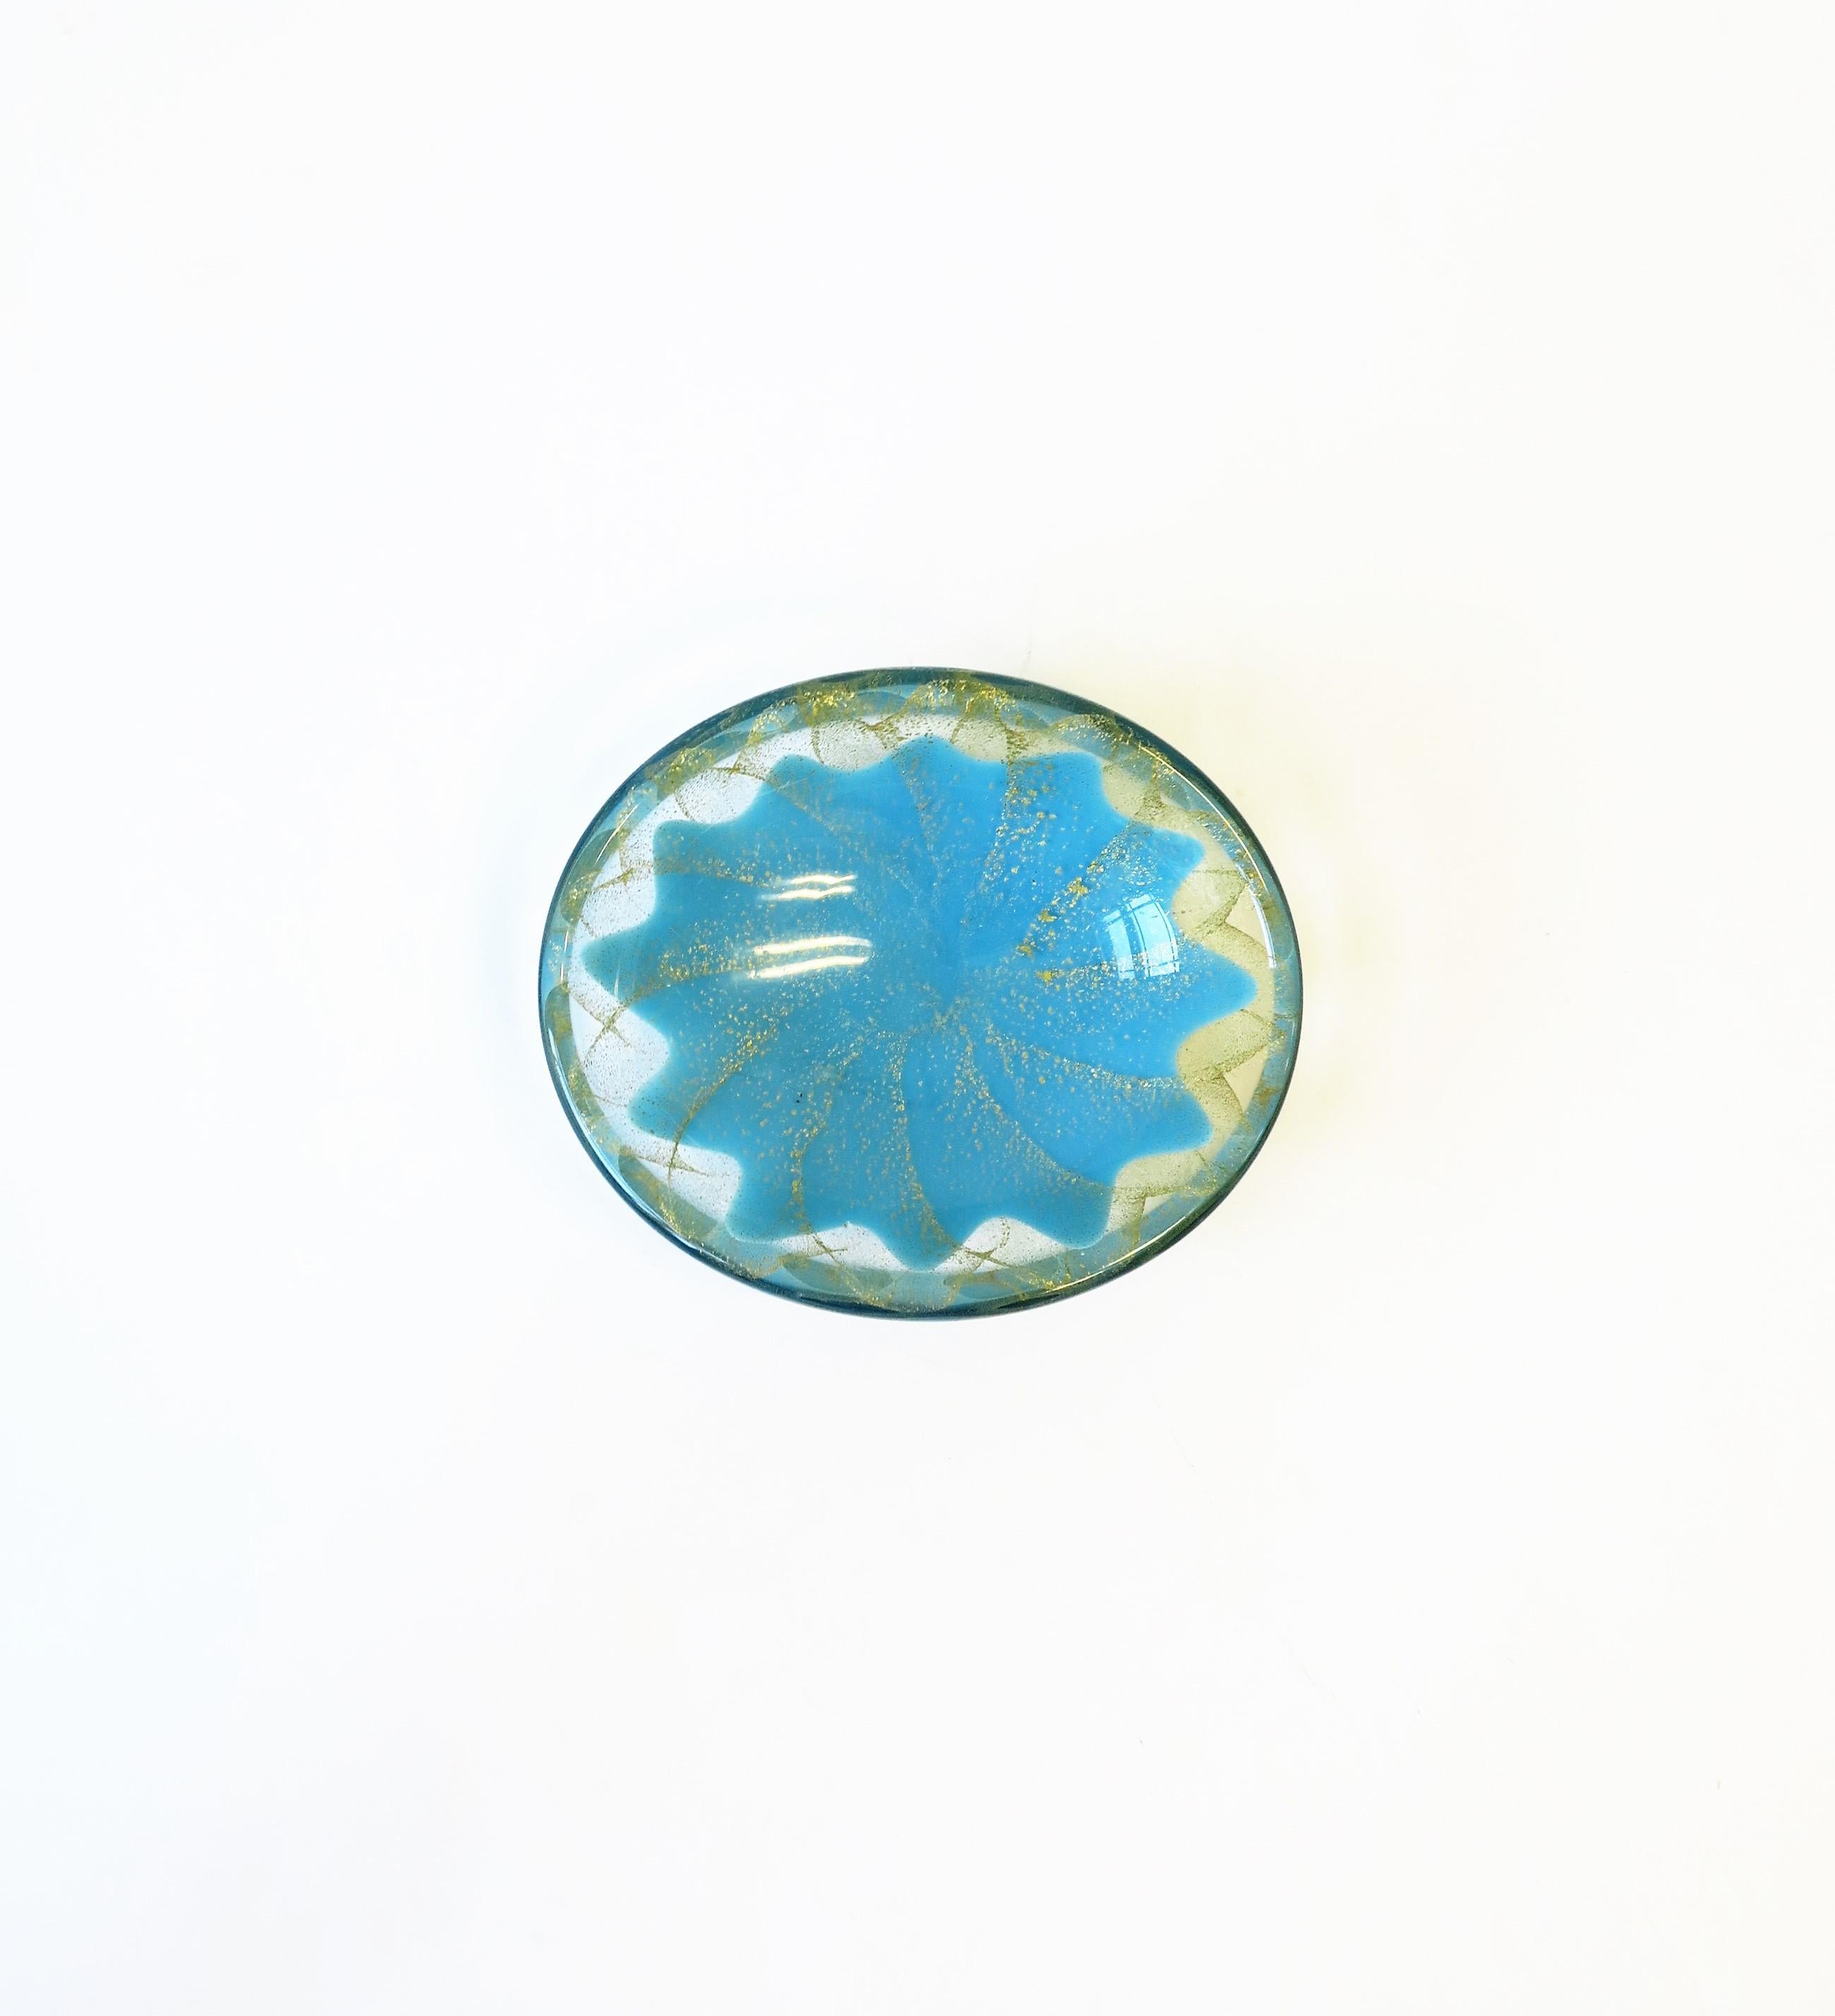 A small oval Italian Murano sky blue and gold art glass bowl, circa mid-20th century, Italy. Great as a standalone piece or to hold small items such as jewelry on a desk, vanity, nightstand, dresser, etc. Dimensions: 3.88